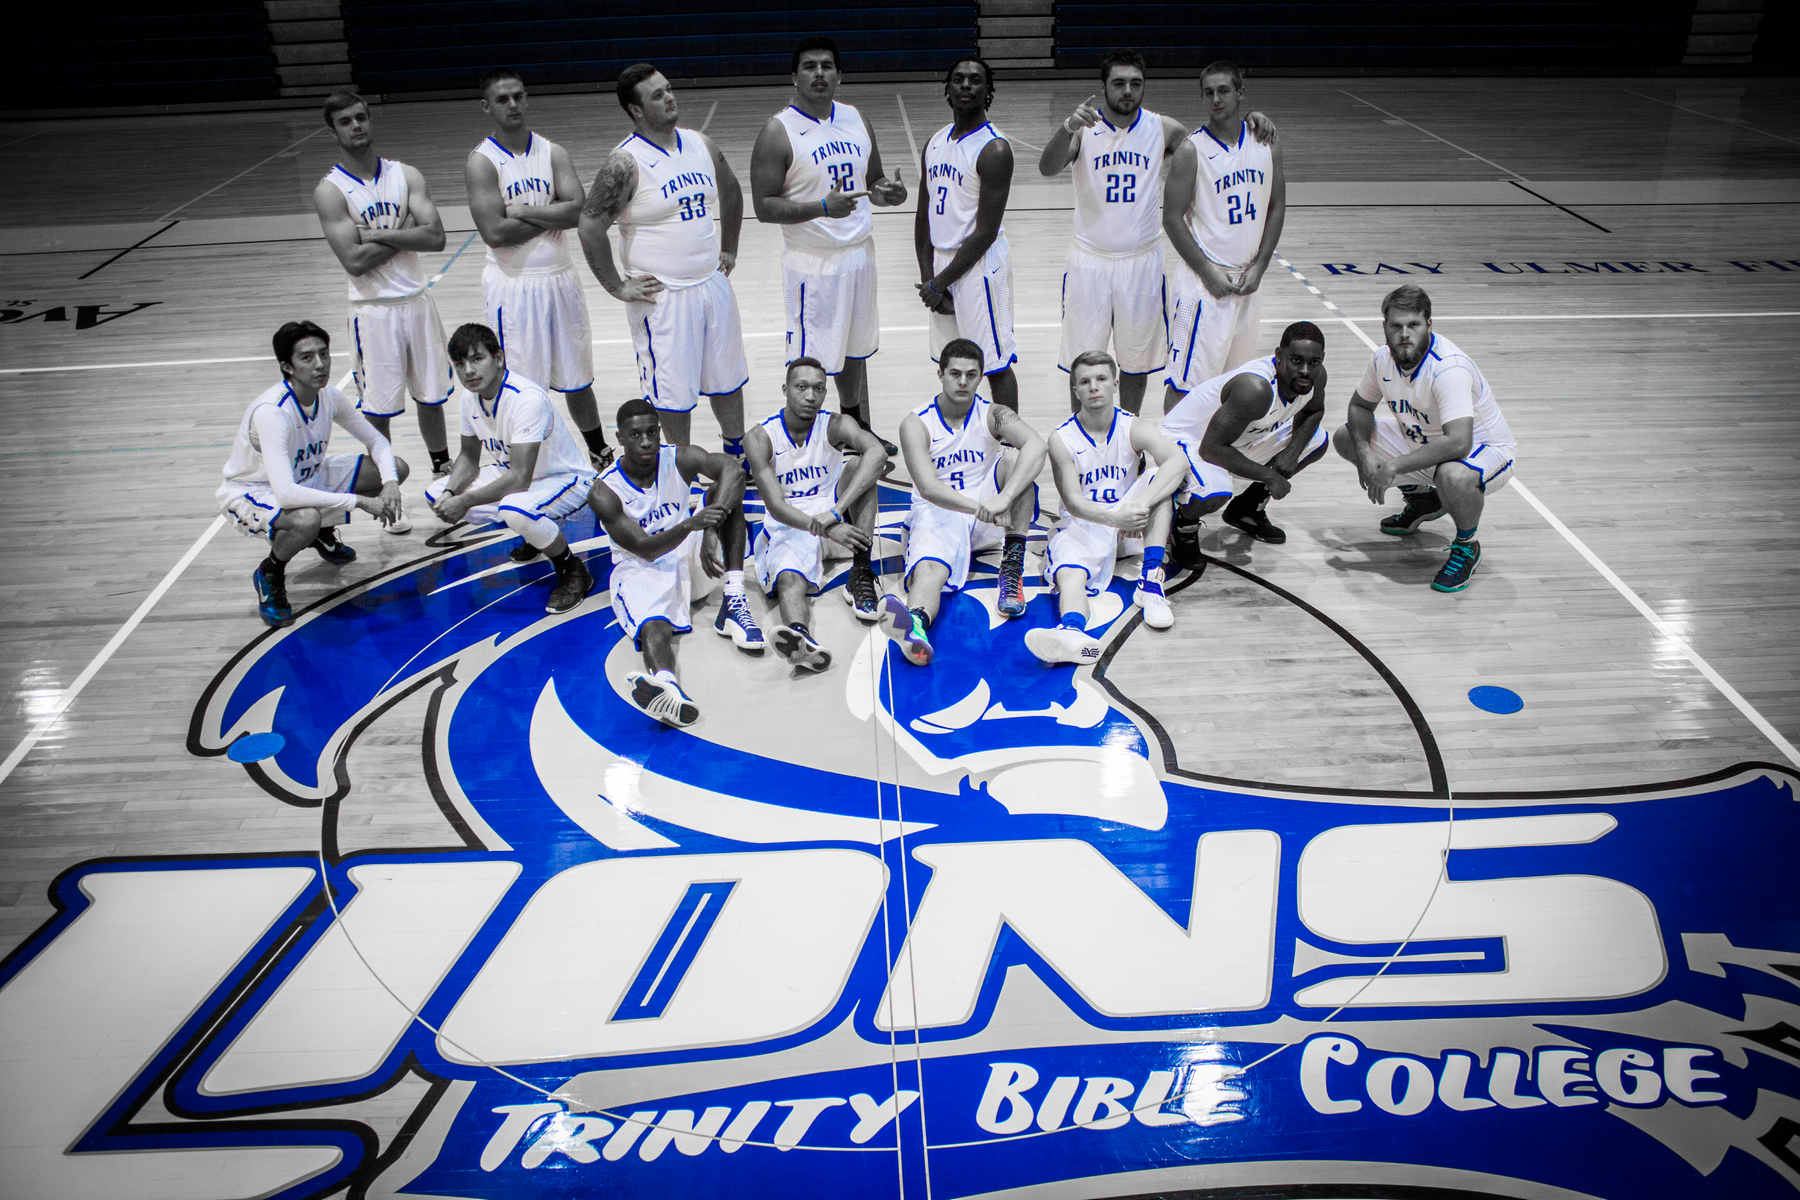 Lions MBB Come Up Short in ACCA National Championship Game